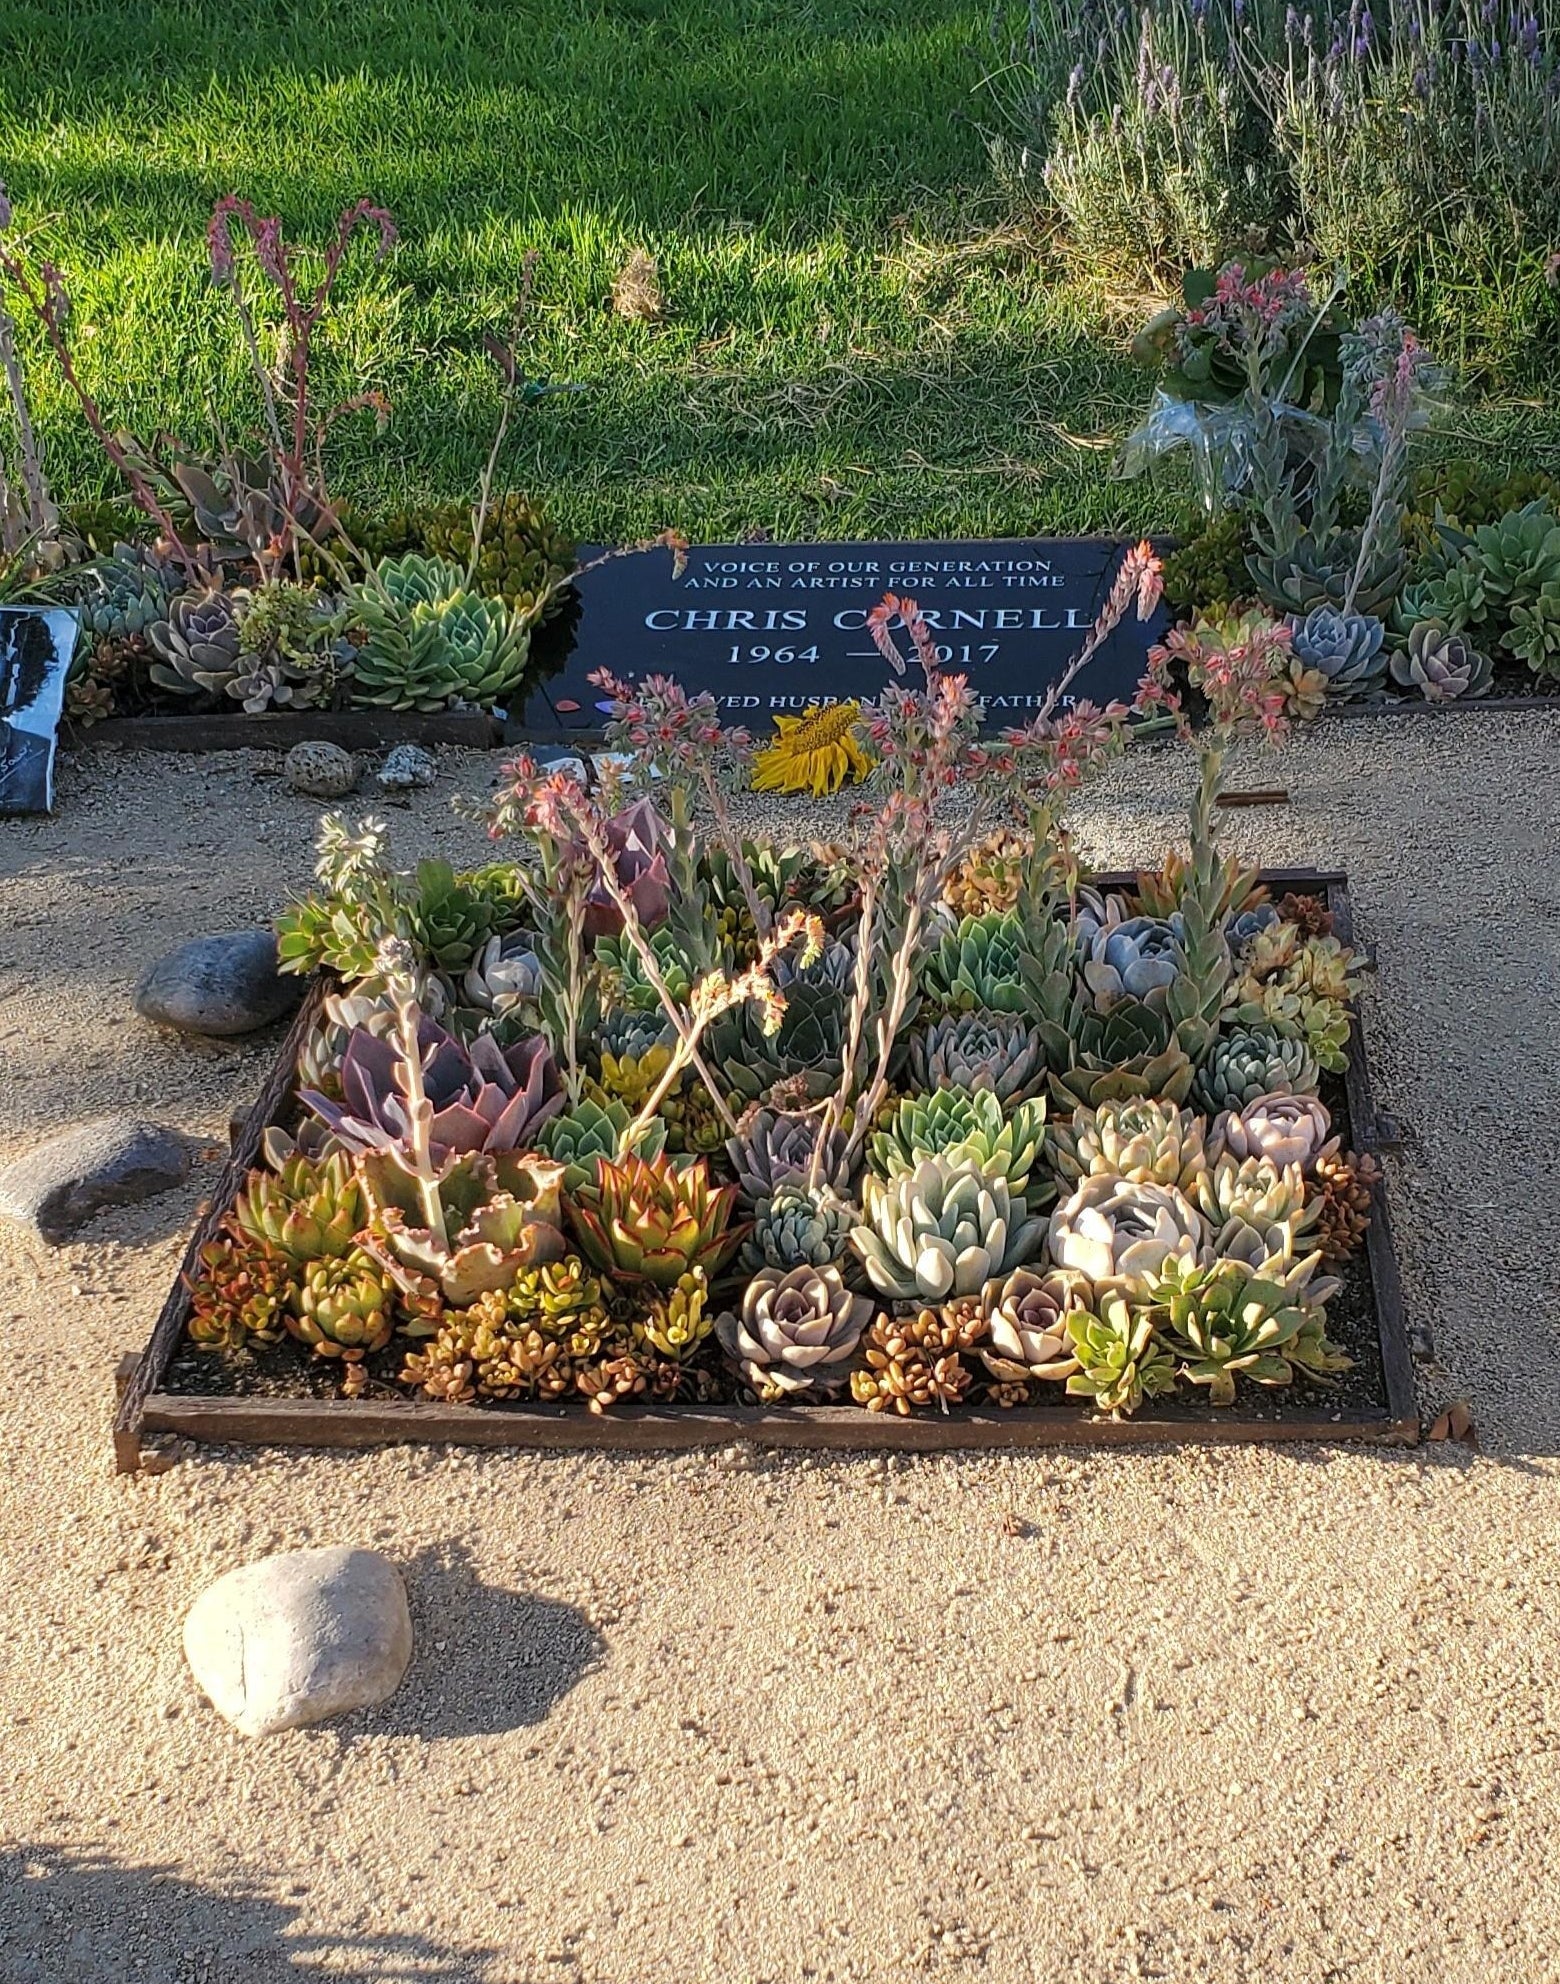 A simple grave stone on the ground with a section of succulents growing around it